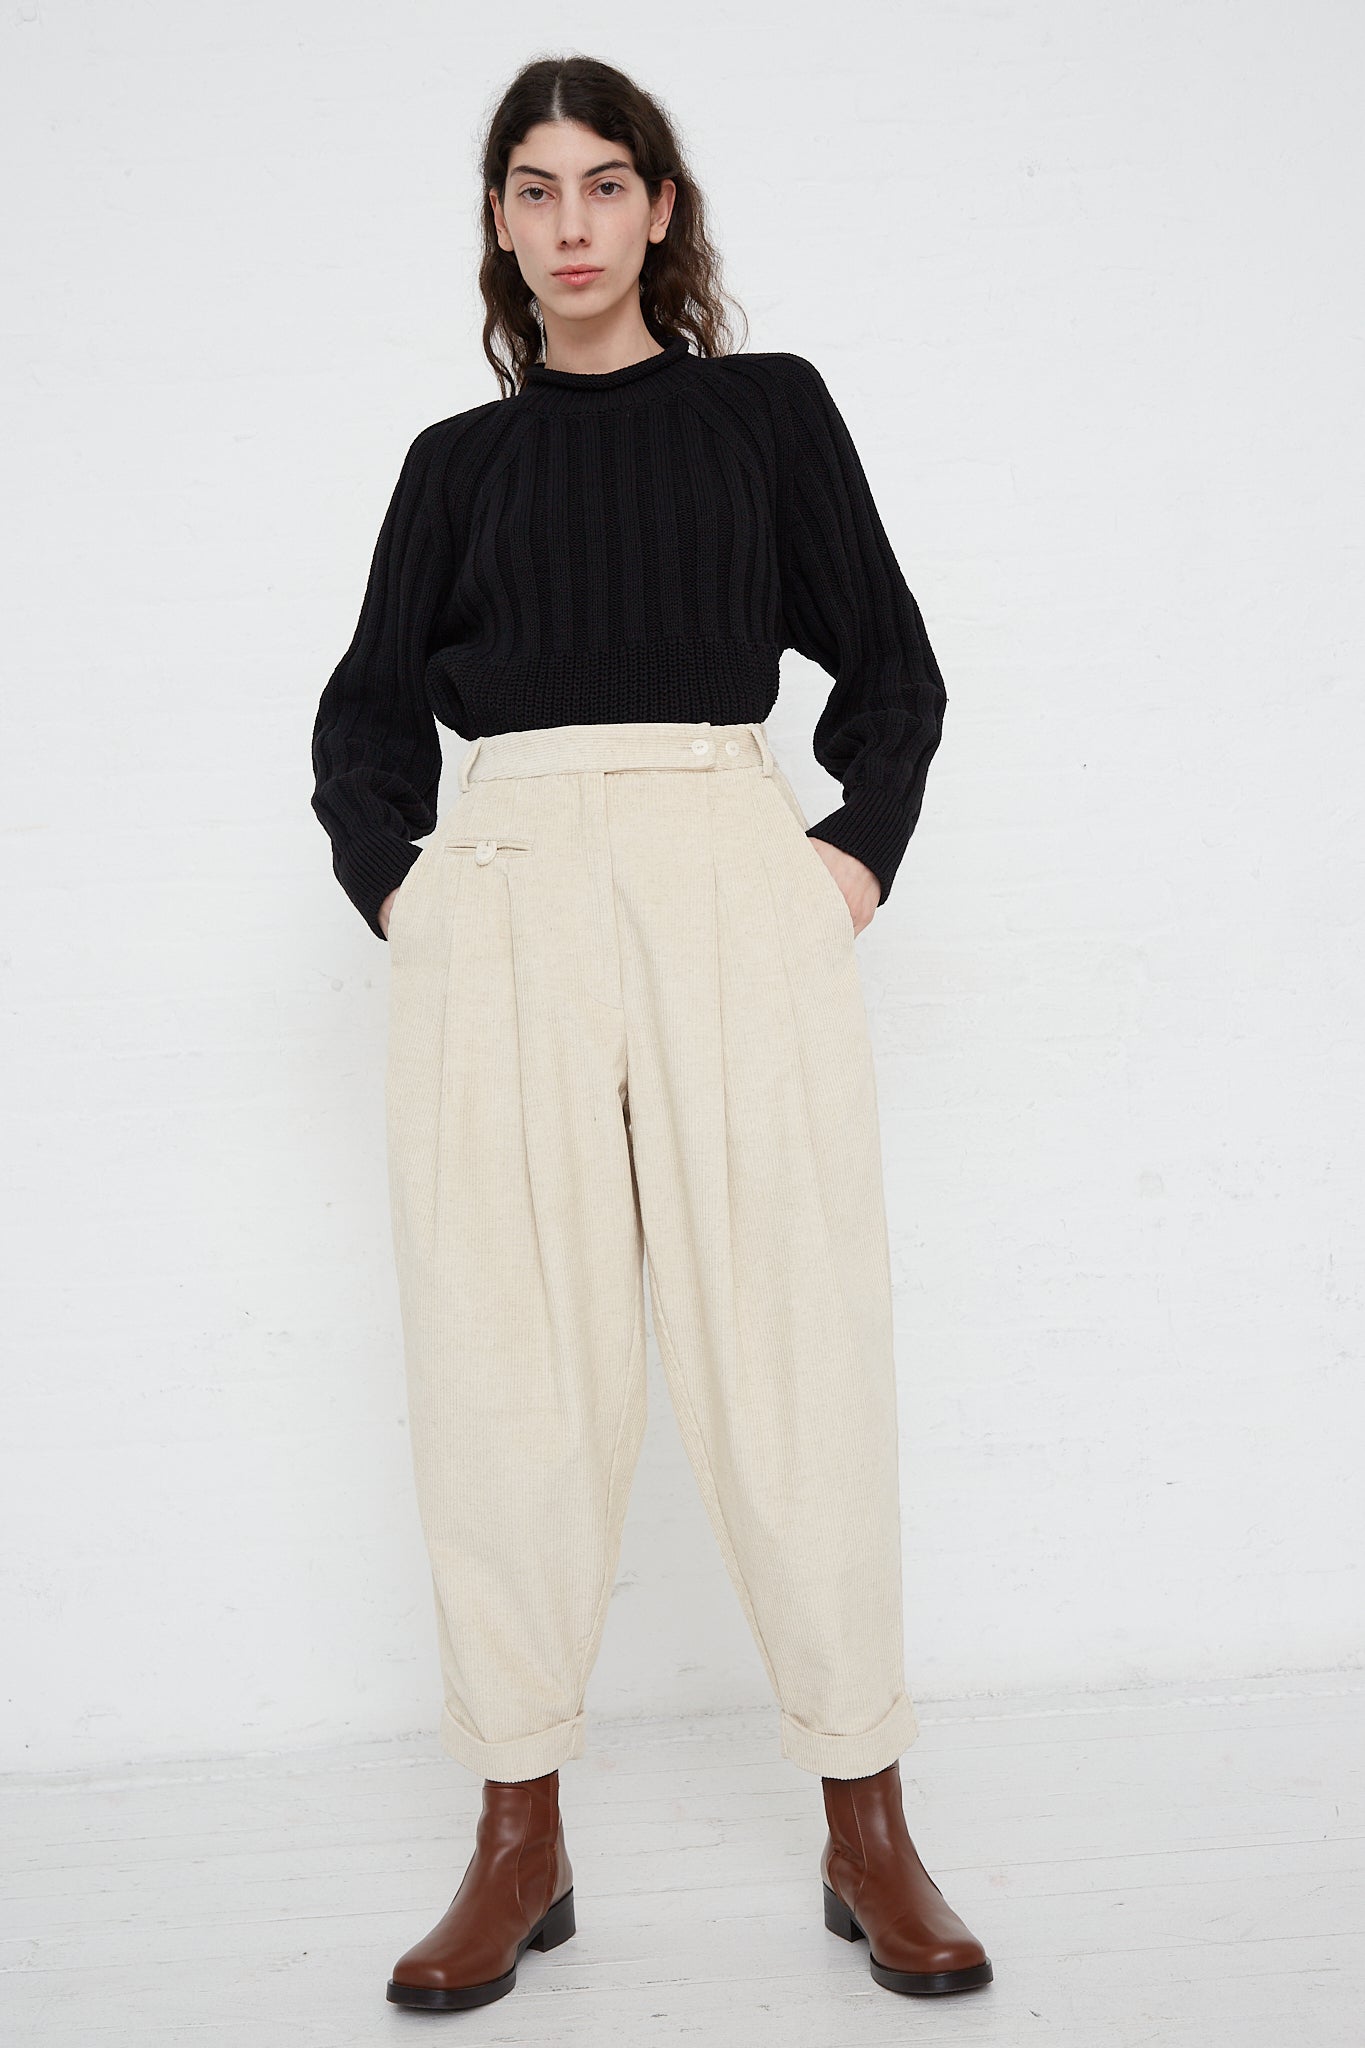 Cordera Corduroy Carrot Pants in Off White